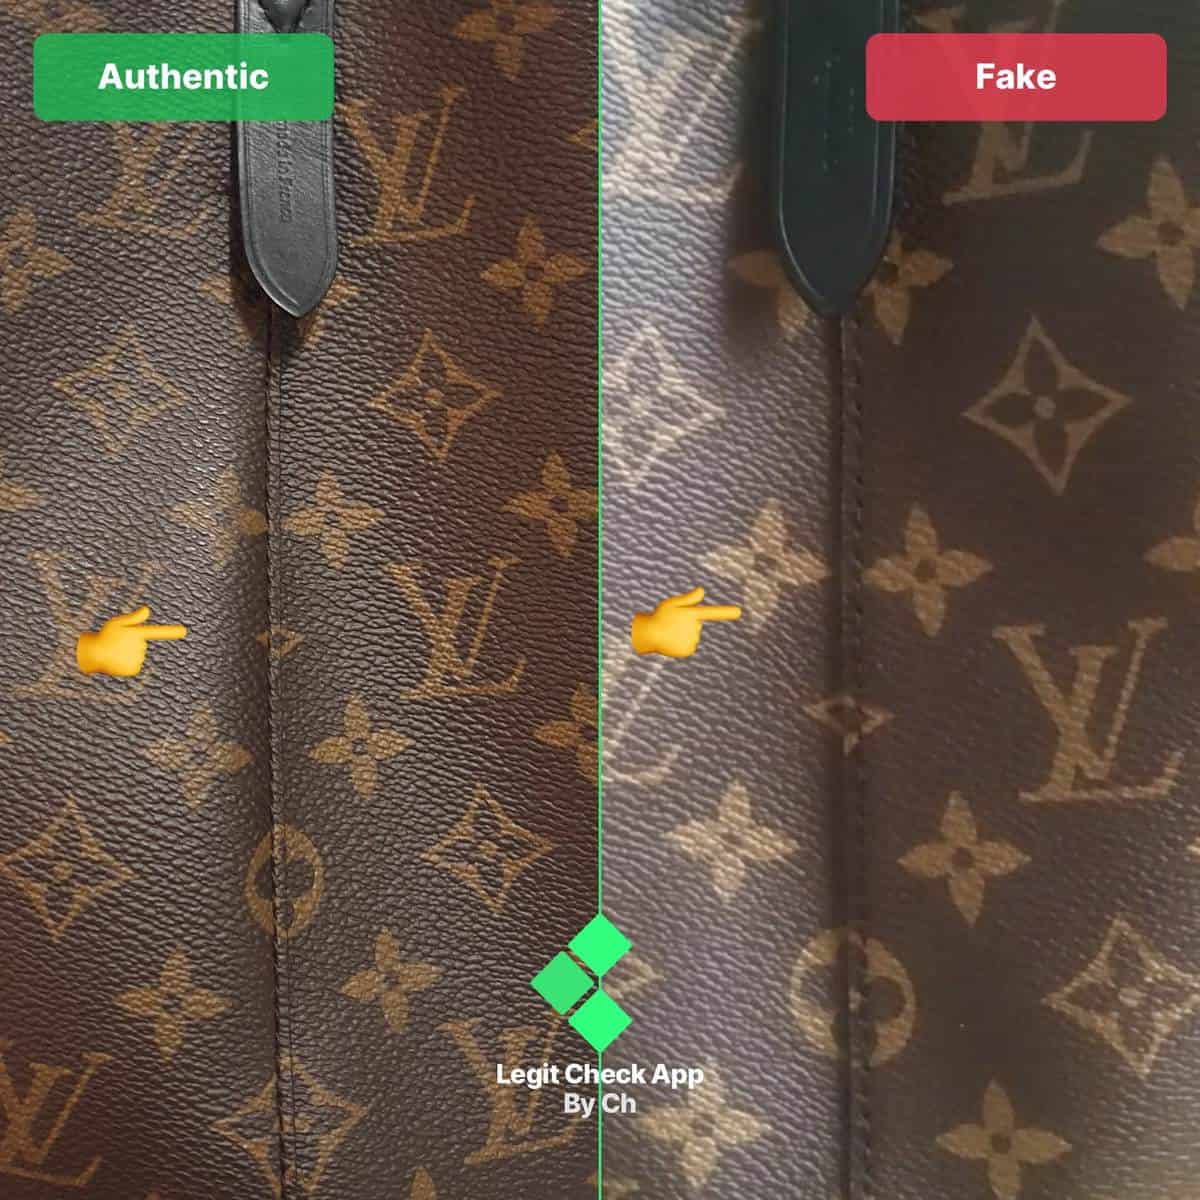 How to authenticate and spot a fake Louis Vuitton handbag